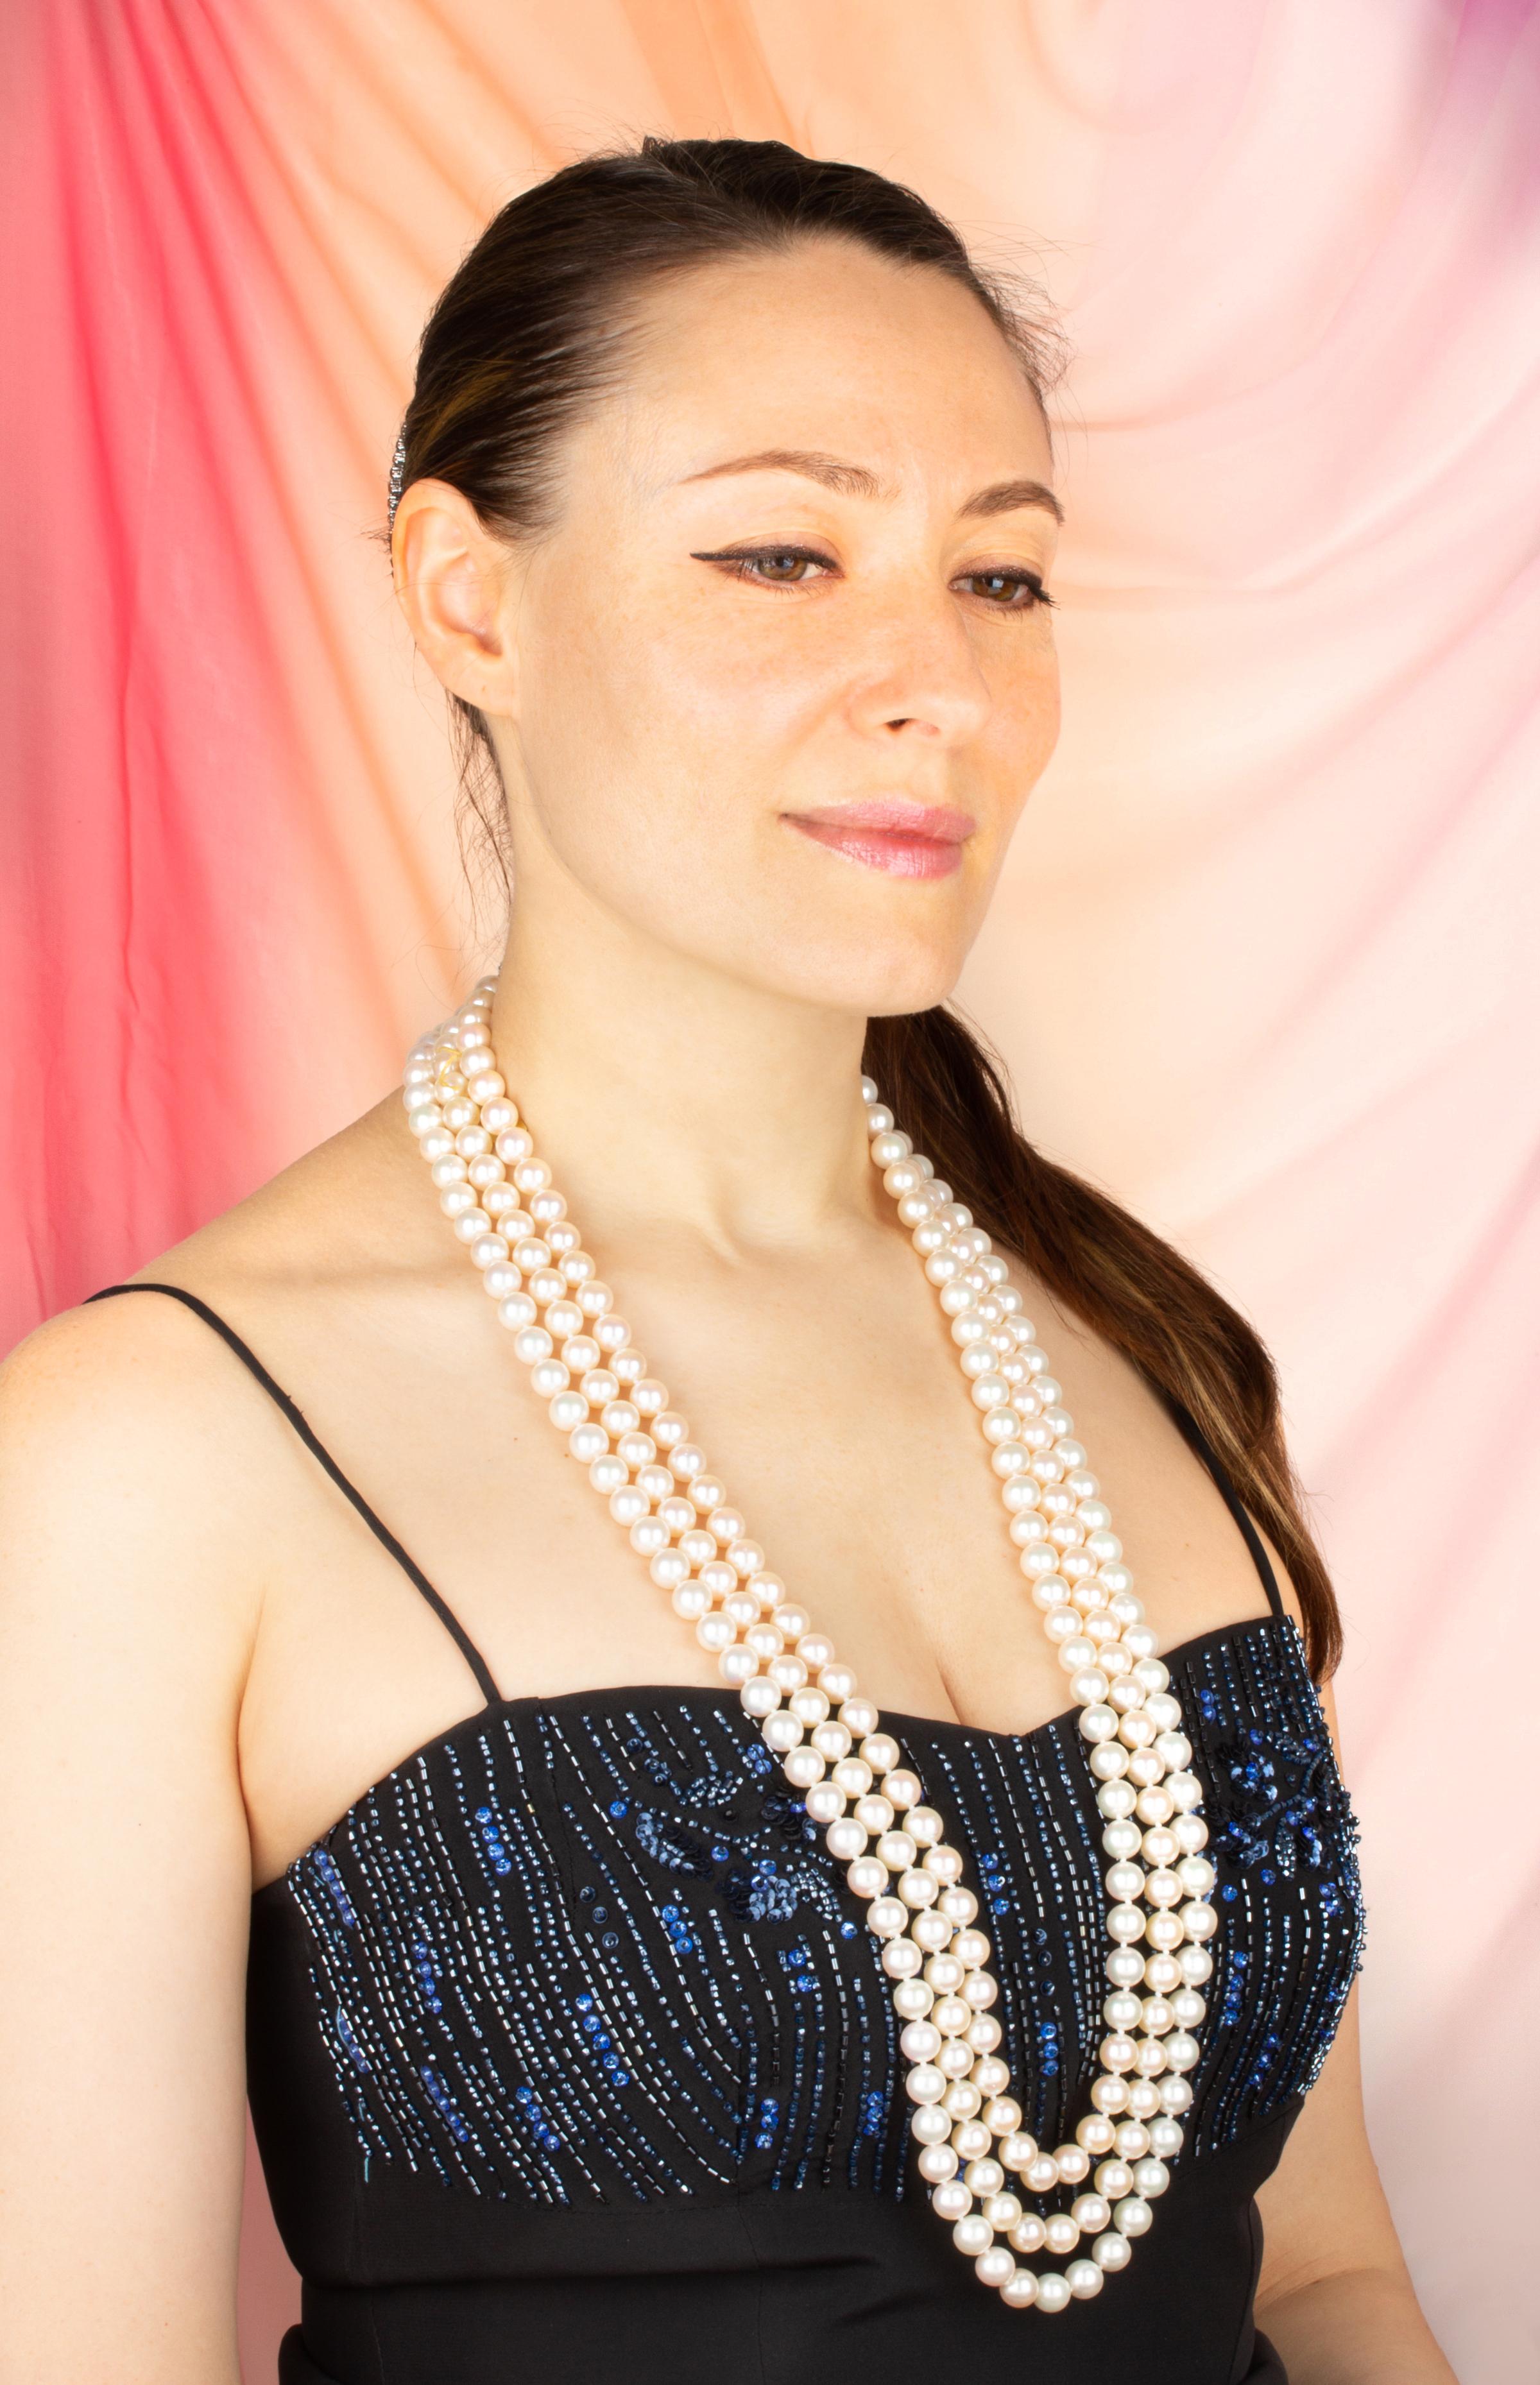 The triple pearl necklace set consists of 6 original strands of Japanese pearls of lovely nacre, lustre, and iridescence. The pearls are homogeneous and measure 9/9.5mm in diameter and were extracted from Akoya (